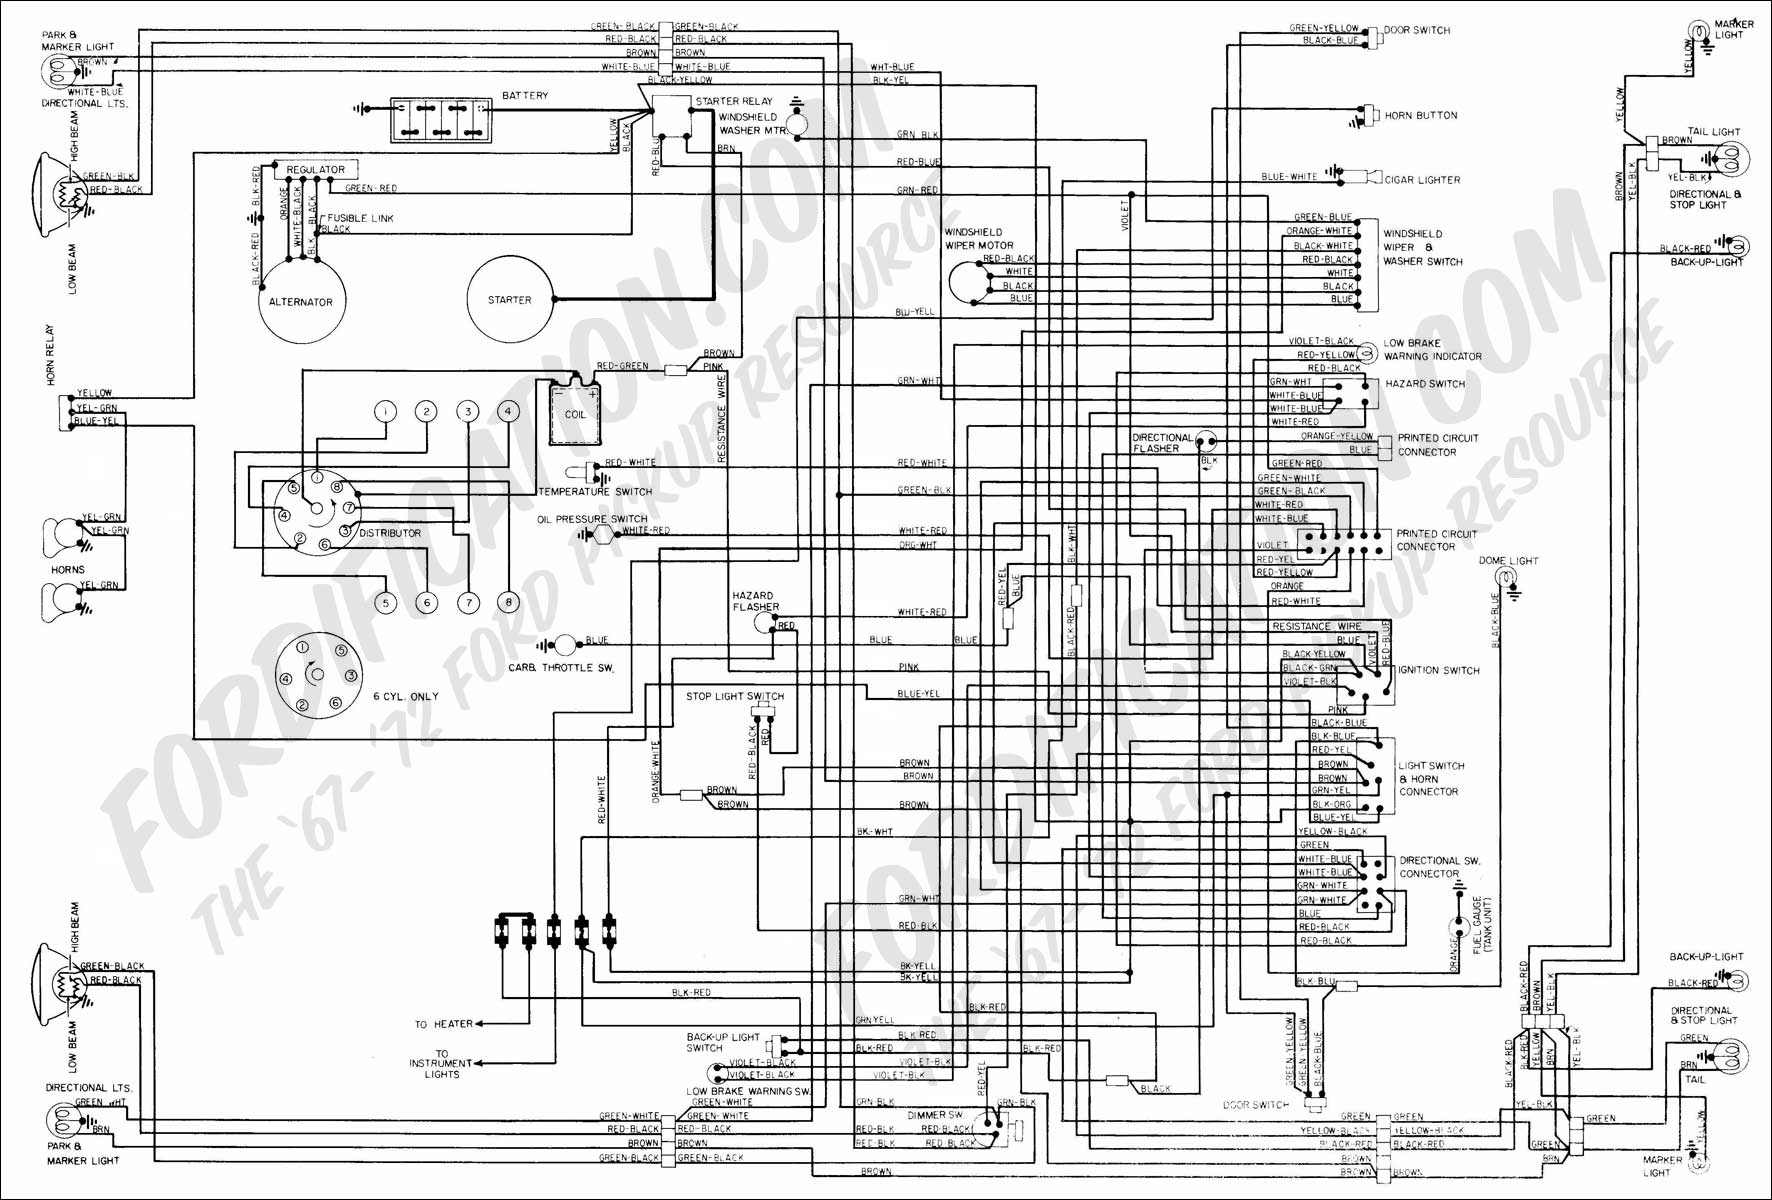 Ford Electrical Diagram - Wiring Diagrams Hubs - Schematic Wiring Diagram